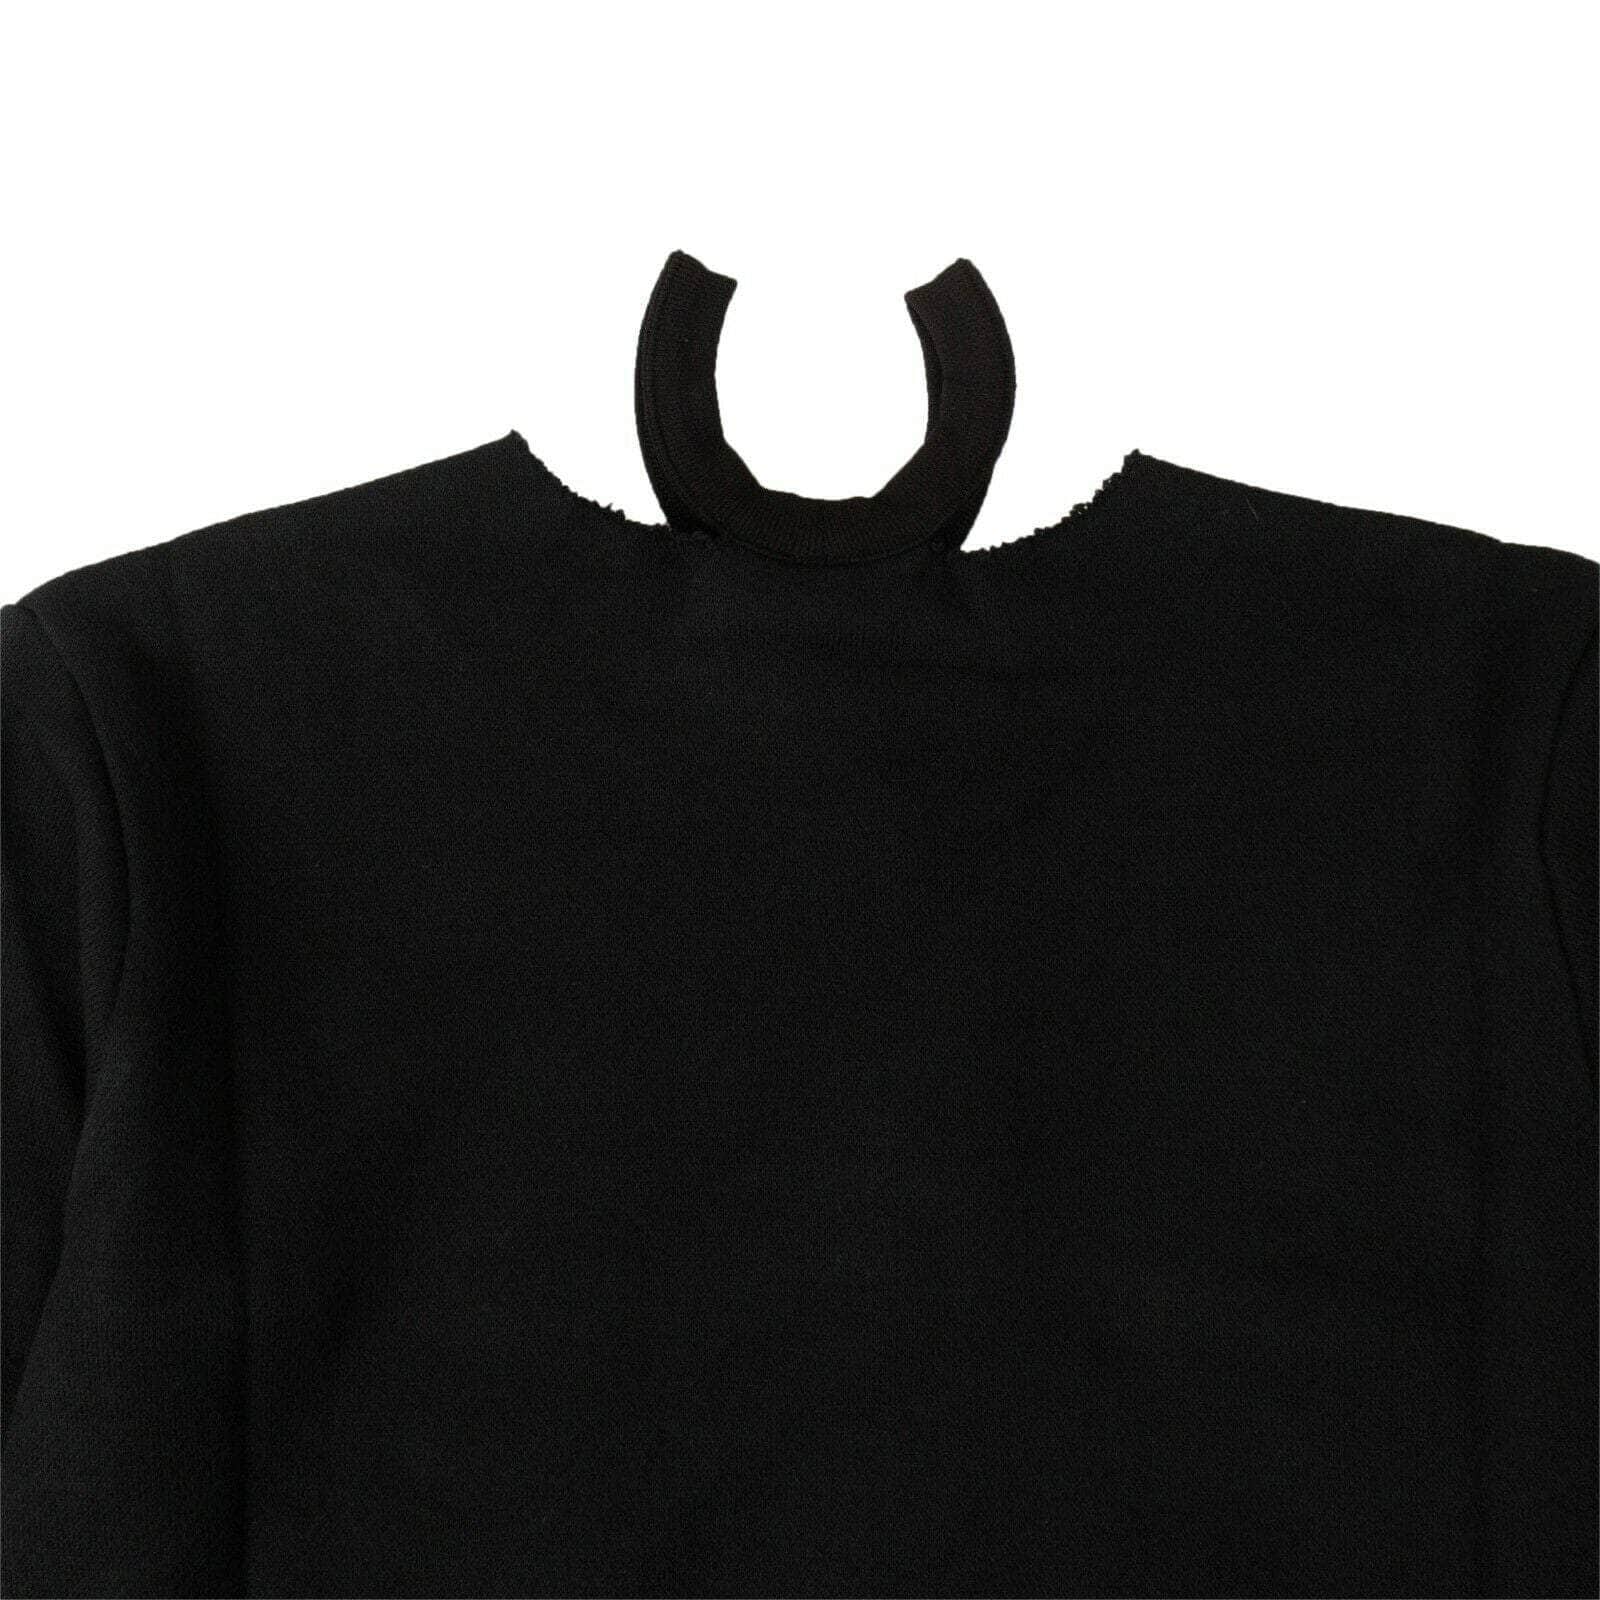 Unravel Project channelenable-all, chicmi, couponcollection, gender-womens, main-clothing, size-xxs, under-250, unravel-project, womens-crewneck-sweaters XXS Black Loose Fit Cut Out Sweater 82NGG-UN-1078/XXS 82NGG-UN-1078/XXS